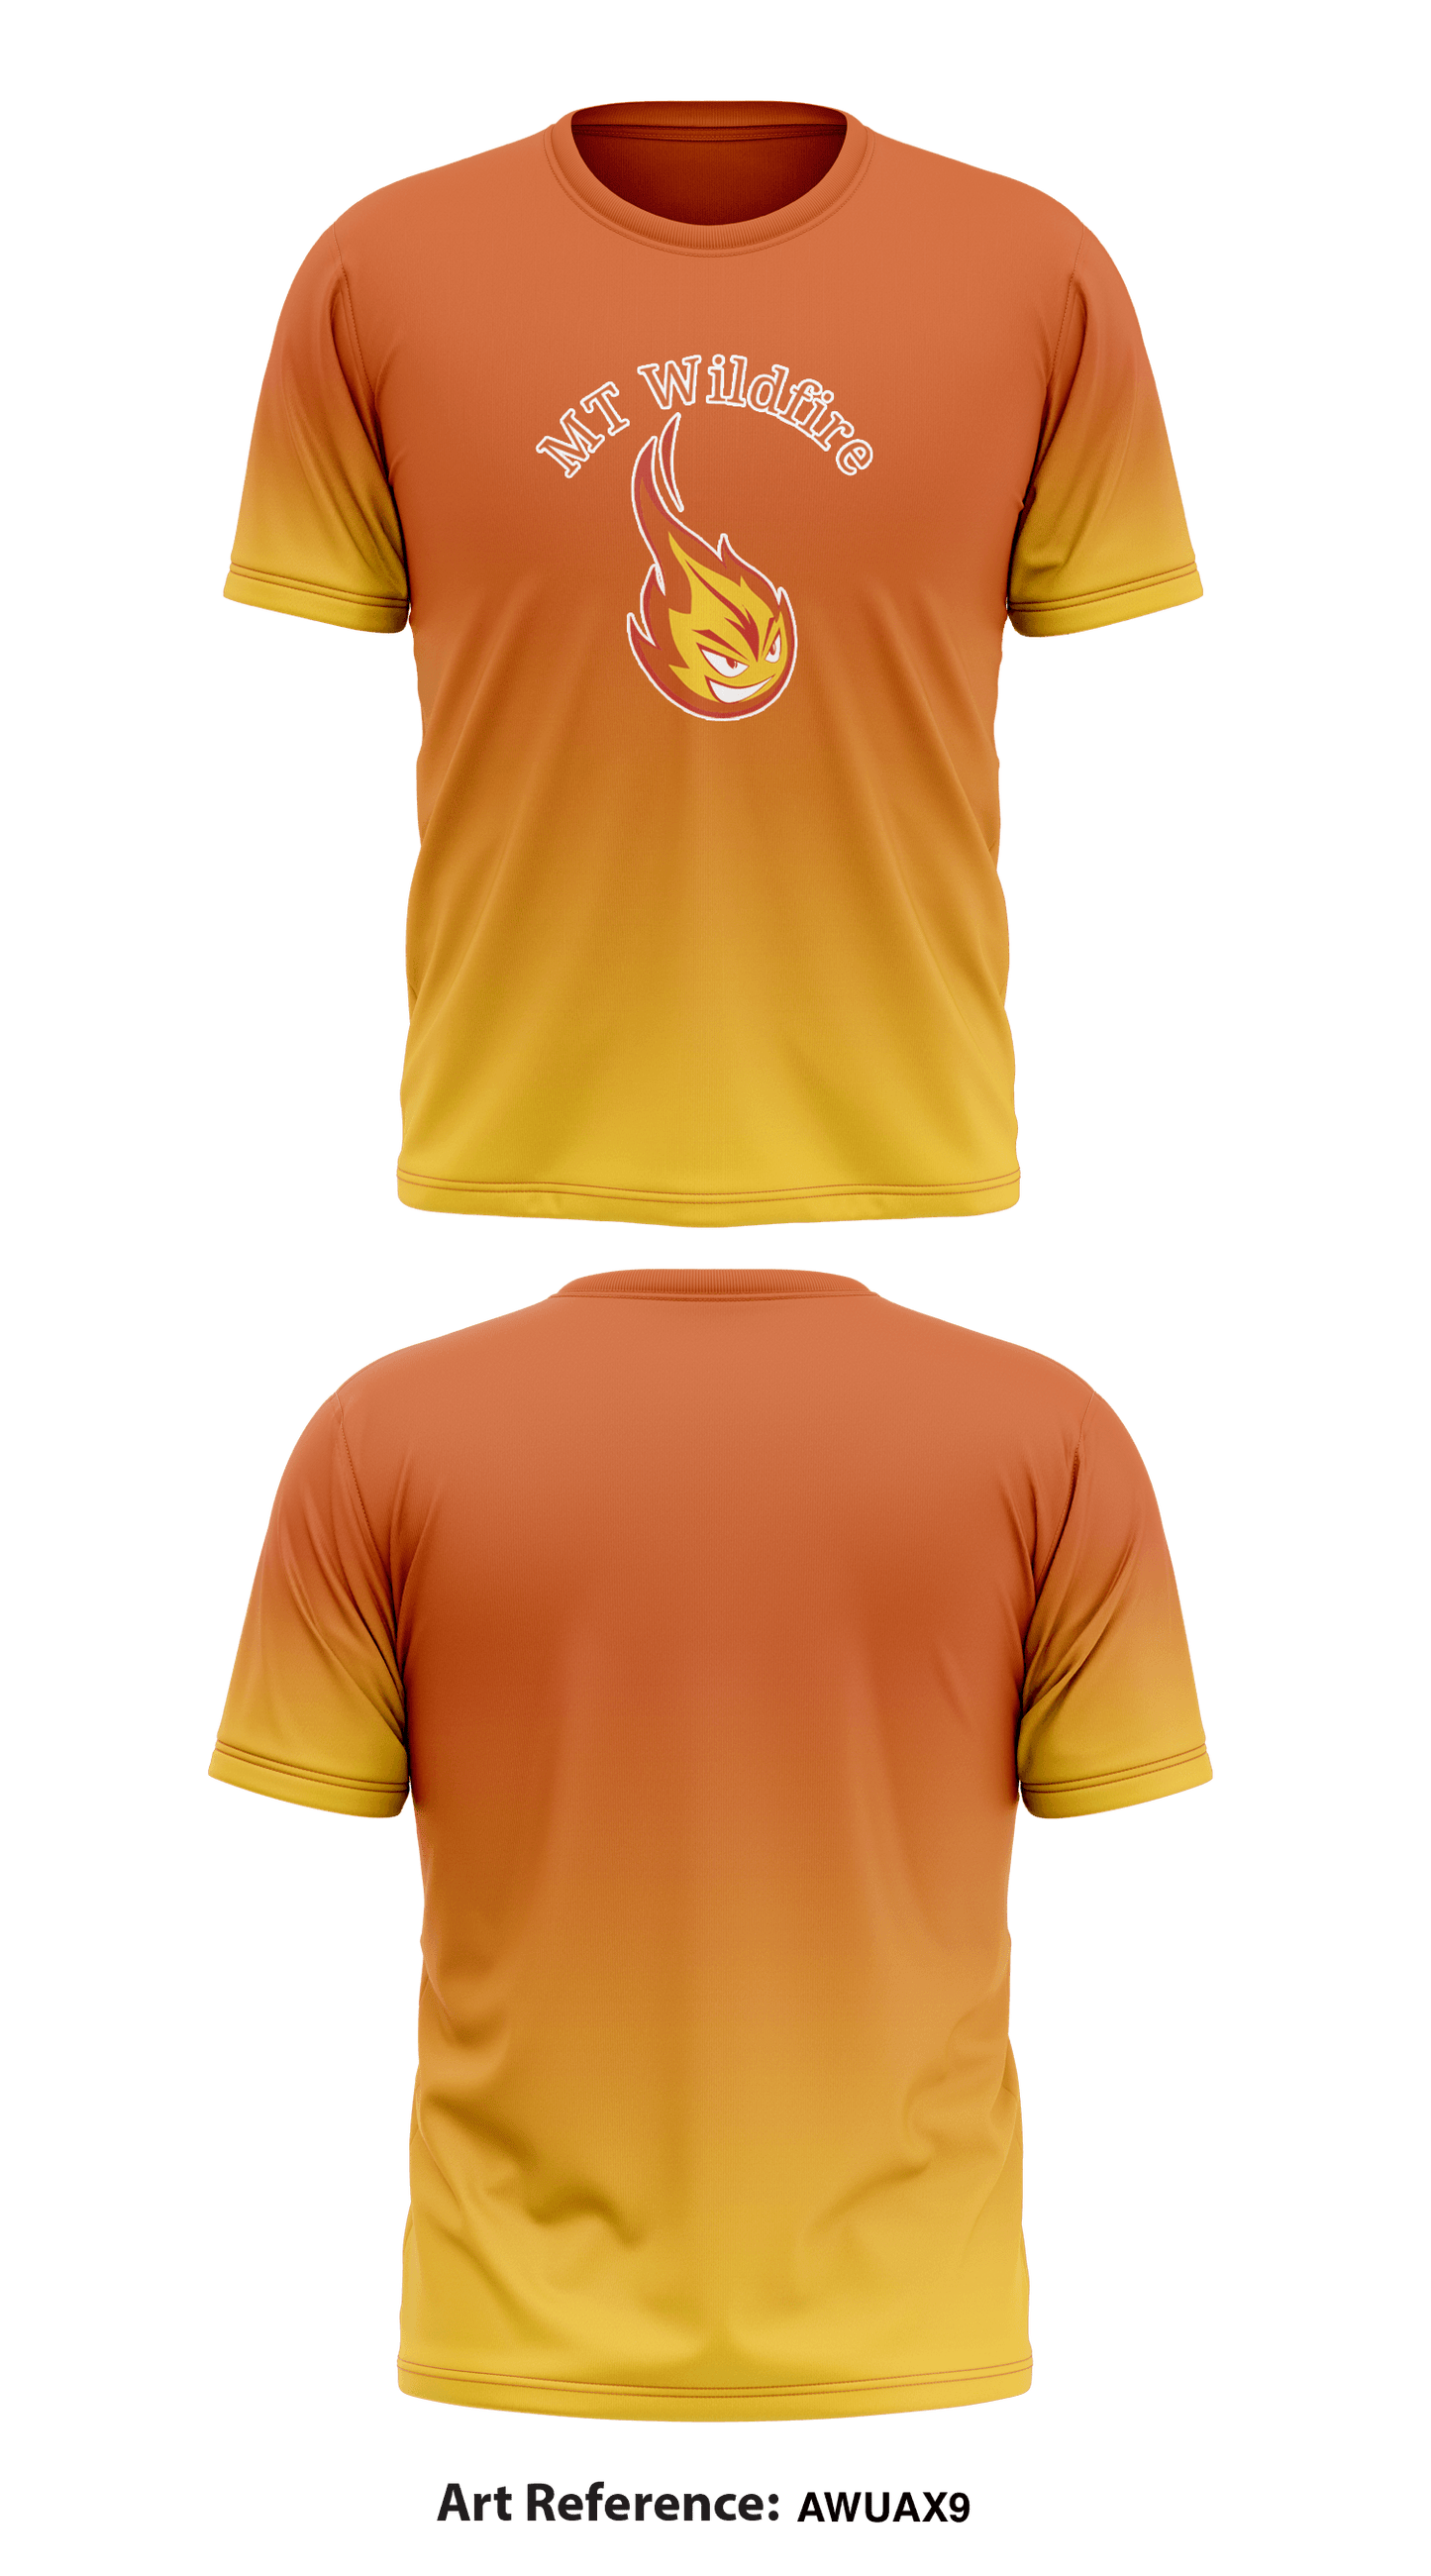 MT Wildfire Store 1 Core Men's SS Performance Tee - aWuAX9